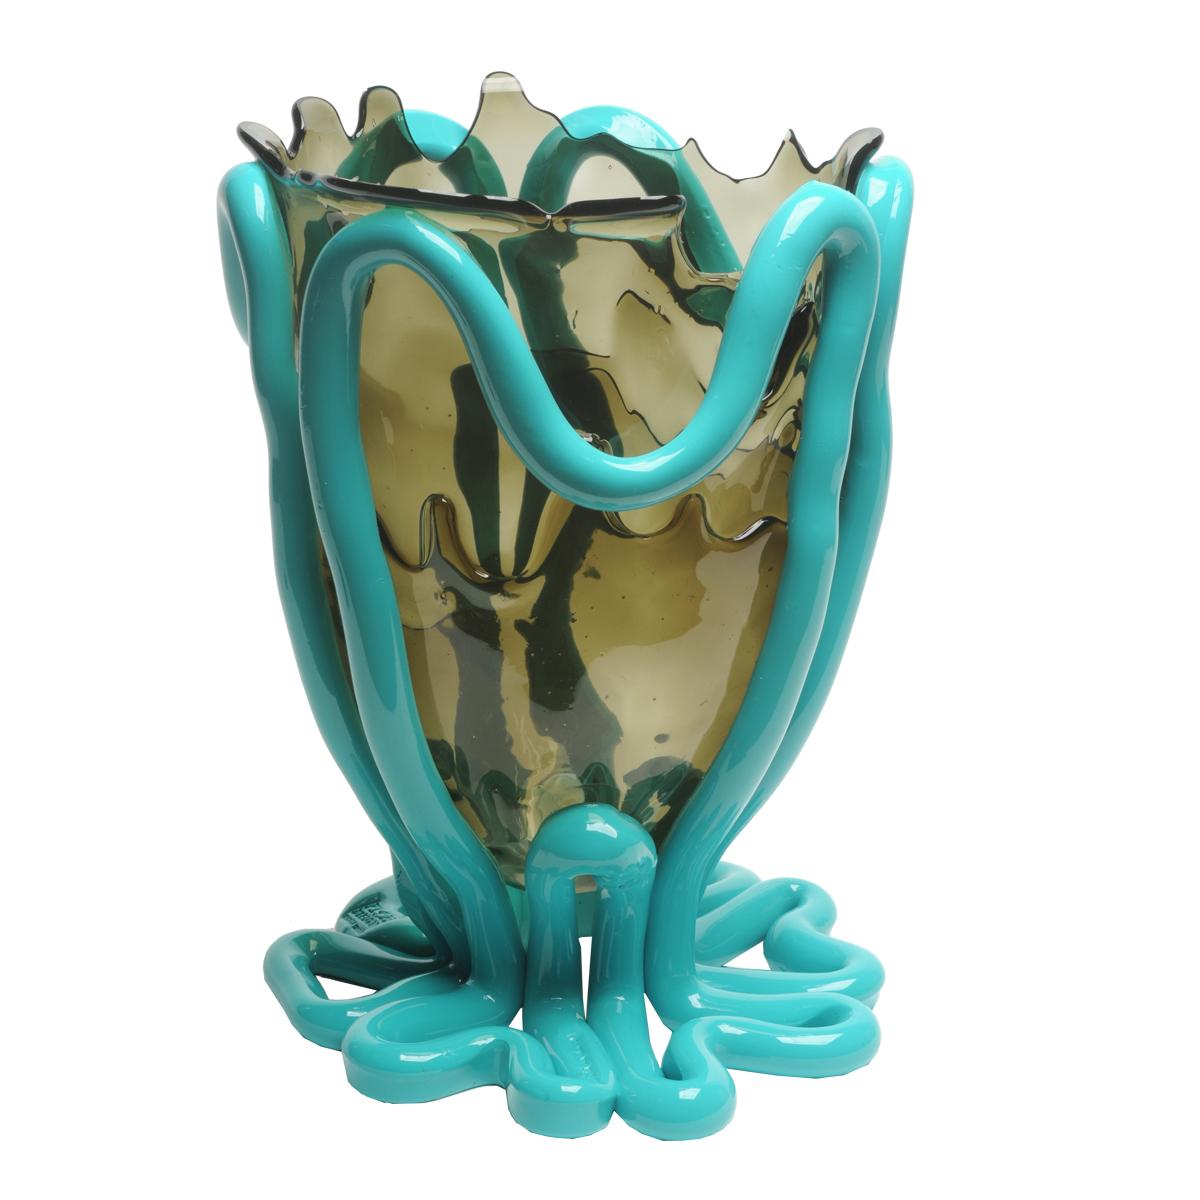 Indian Summer vase - Clear grey and matt turquoise

Vase in soft resin designed by Gaetano Pesce in 1995 for Fish Design collection.
Measures: L - ø 22cm x H 36cm
Colours: Clear grey and matte turquoise.

Other sizes available.

Vase in soft resin